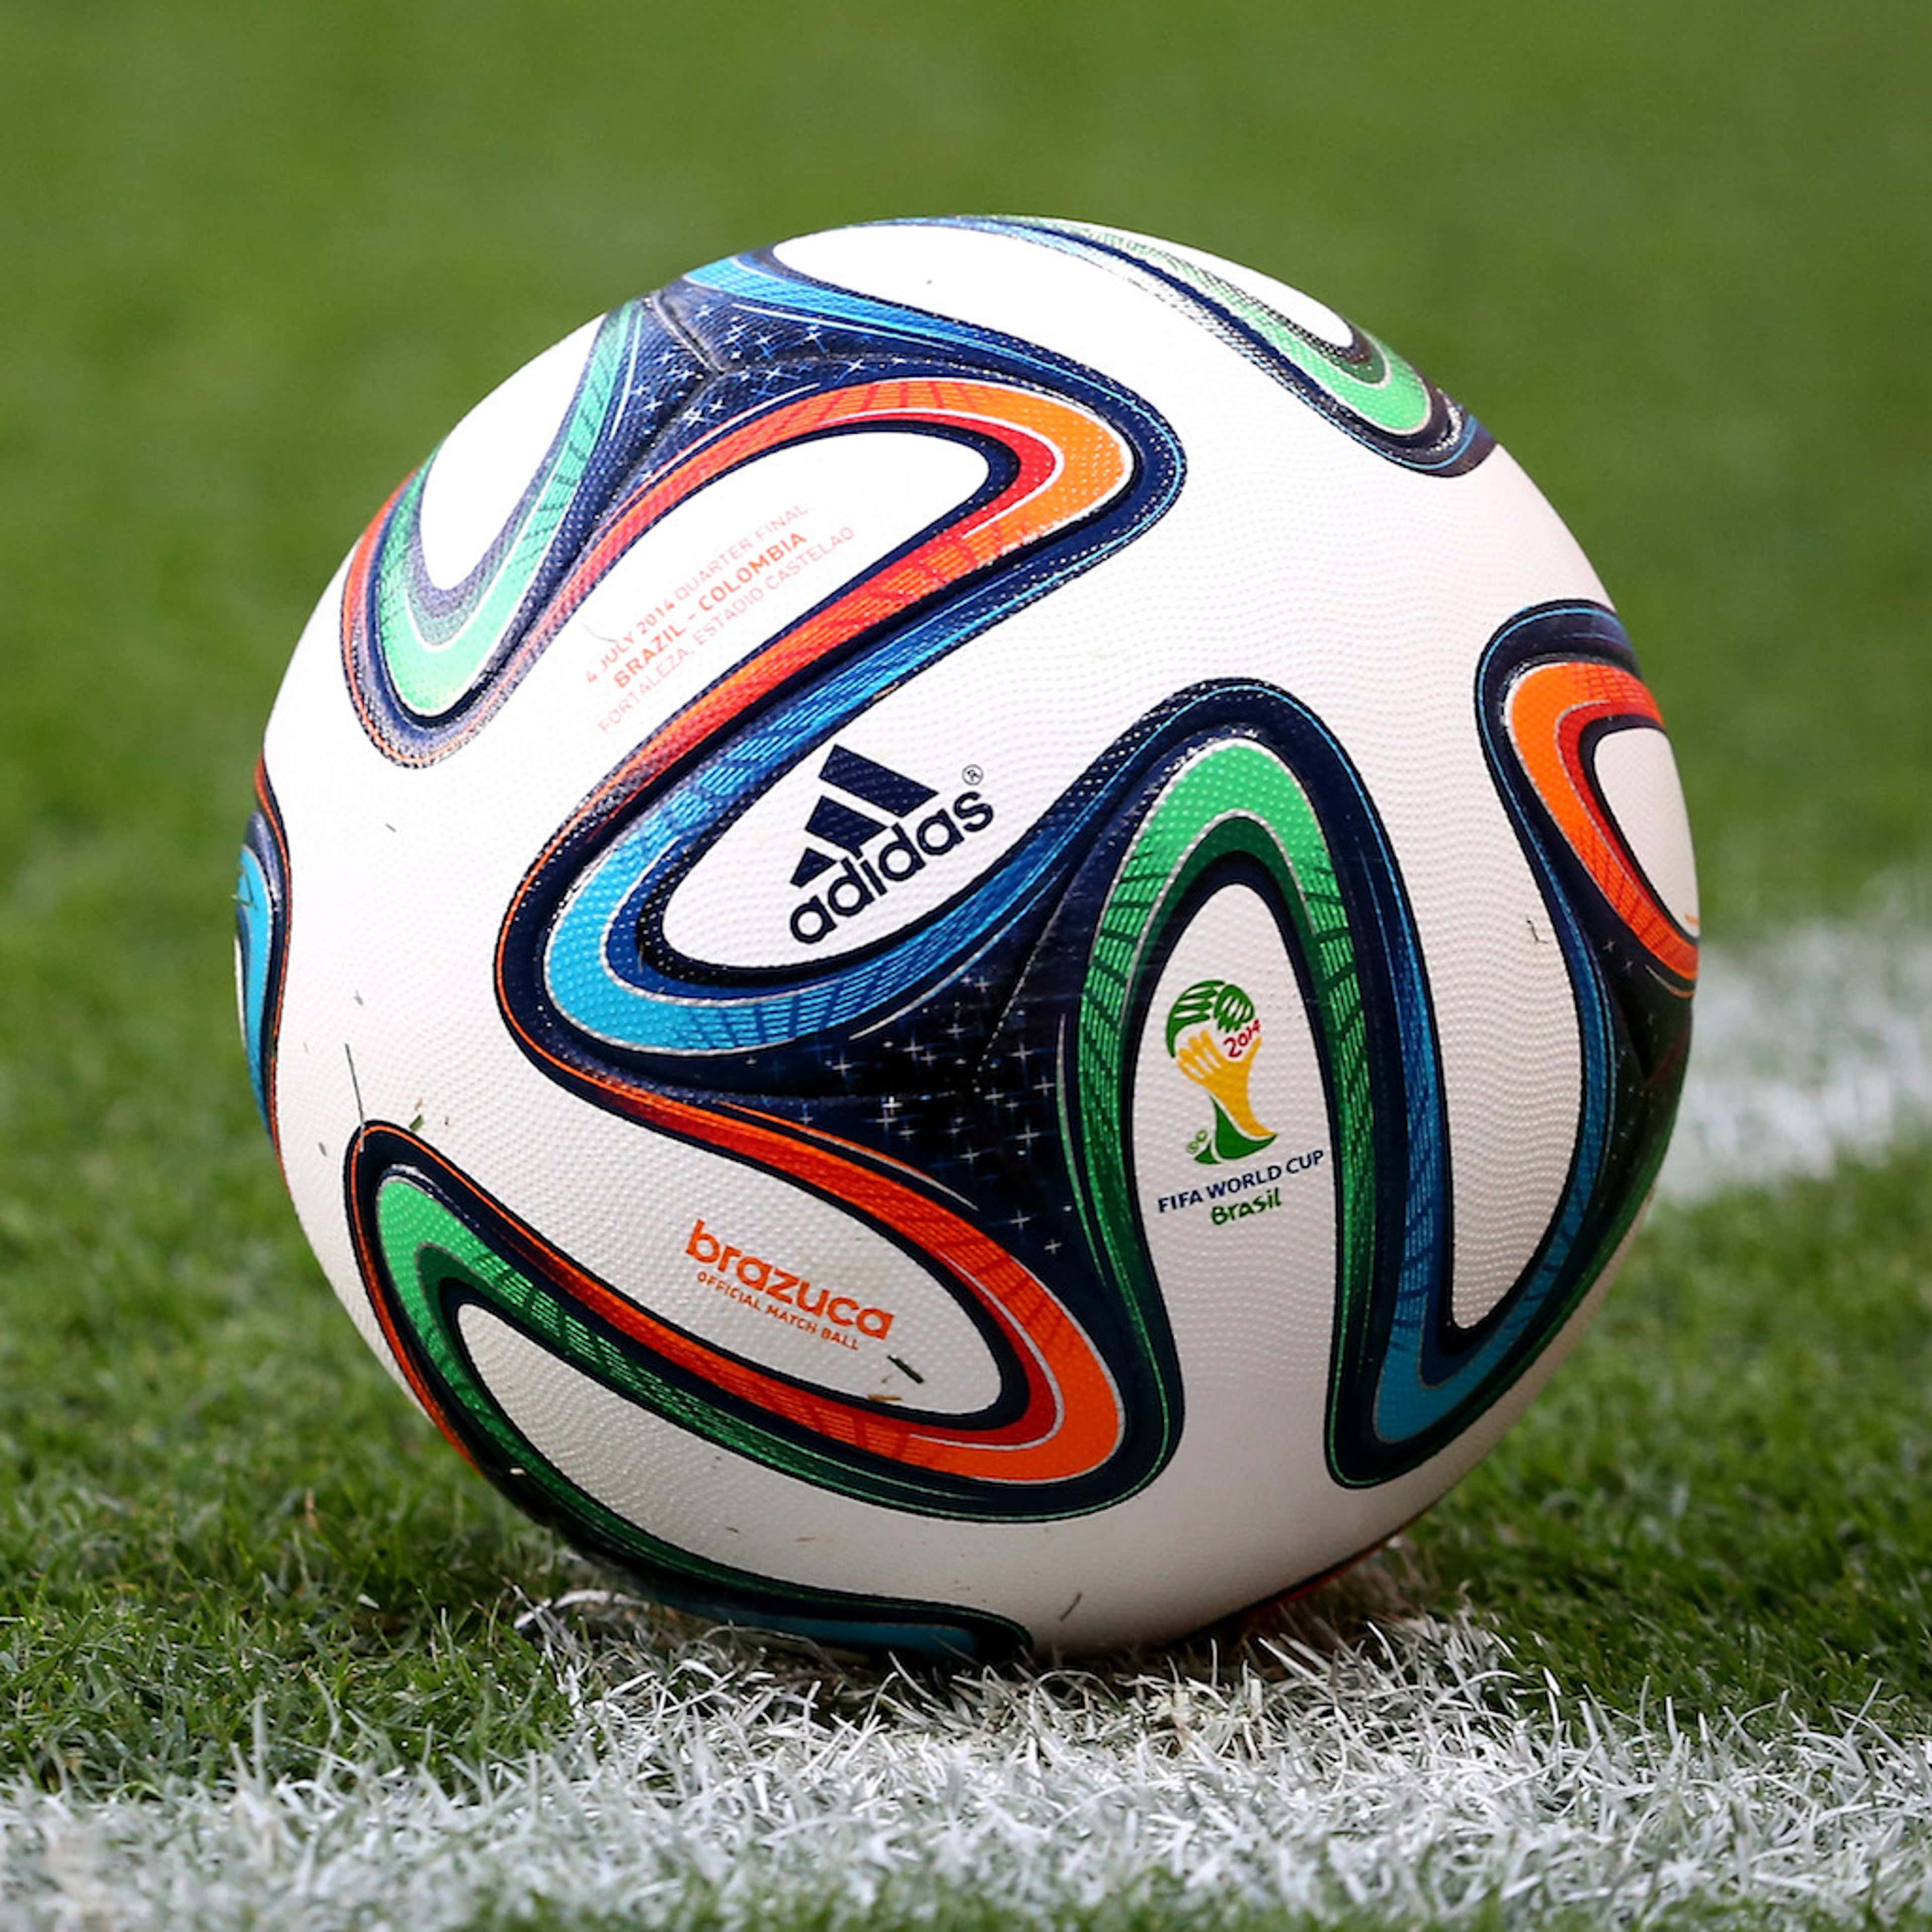 Adidas Brazuca - Official World Cup 2014 Ball Details - Soccer